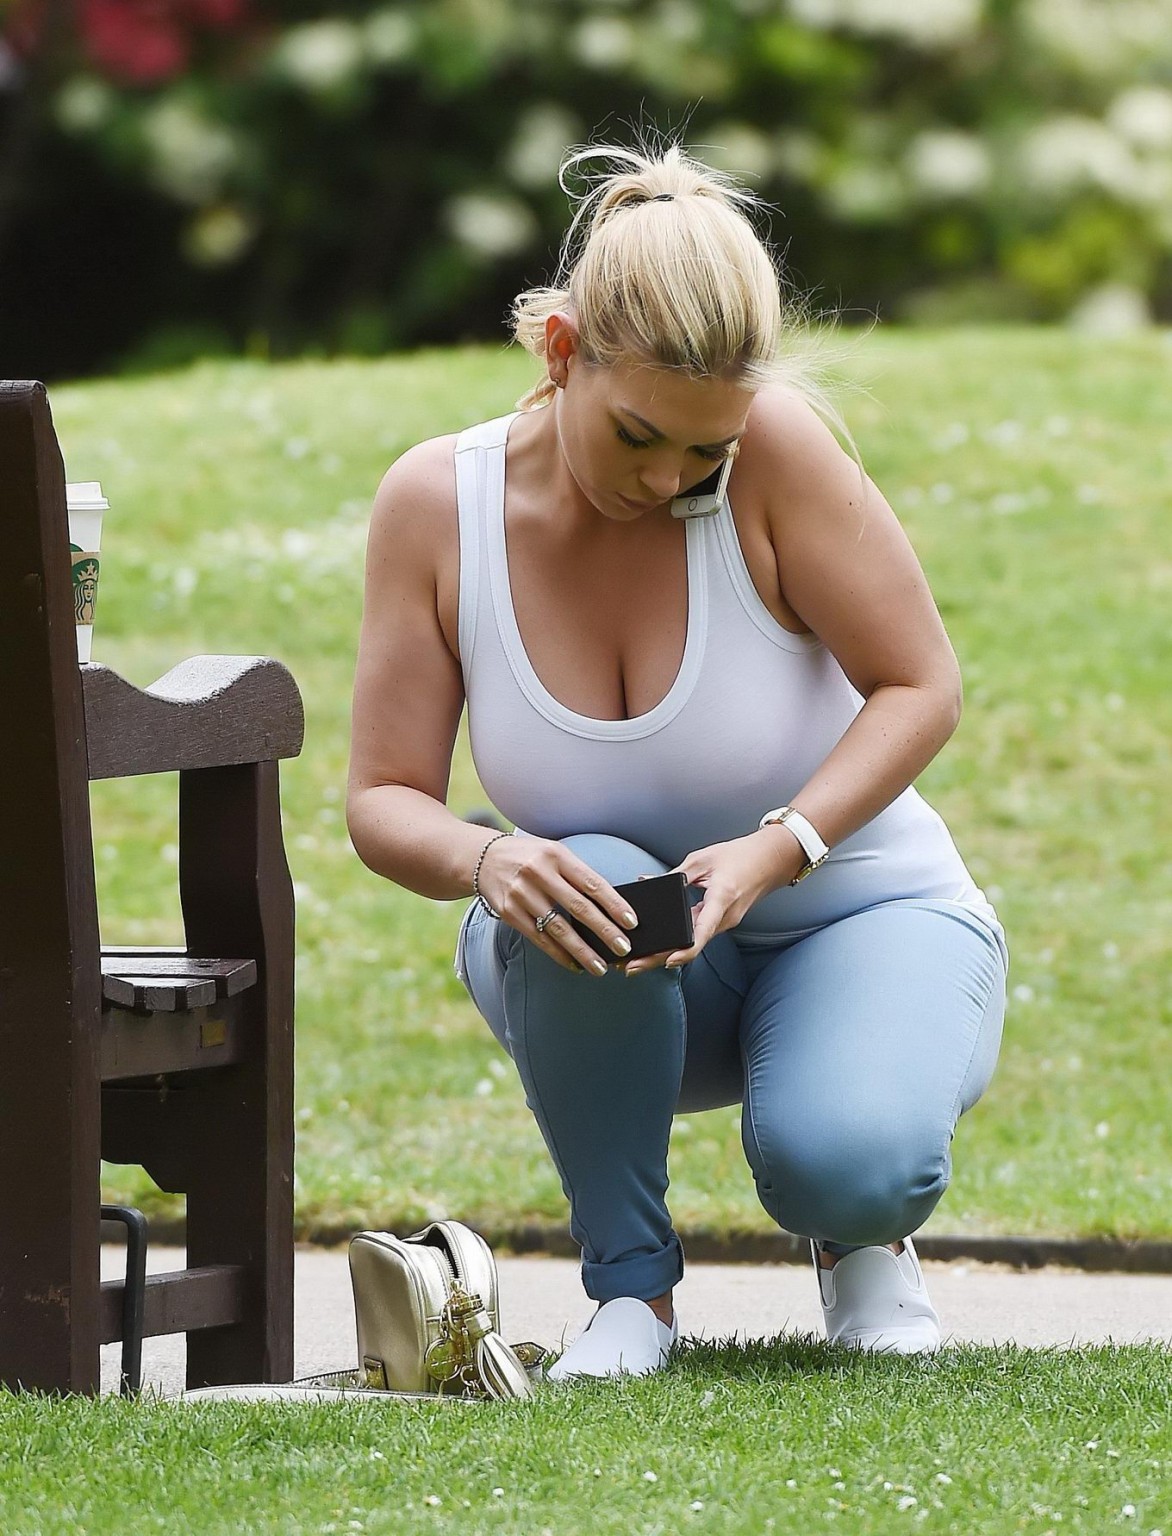 Busty Frankie Essex braless downblouse at a park in London #75162067